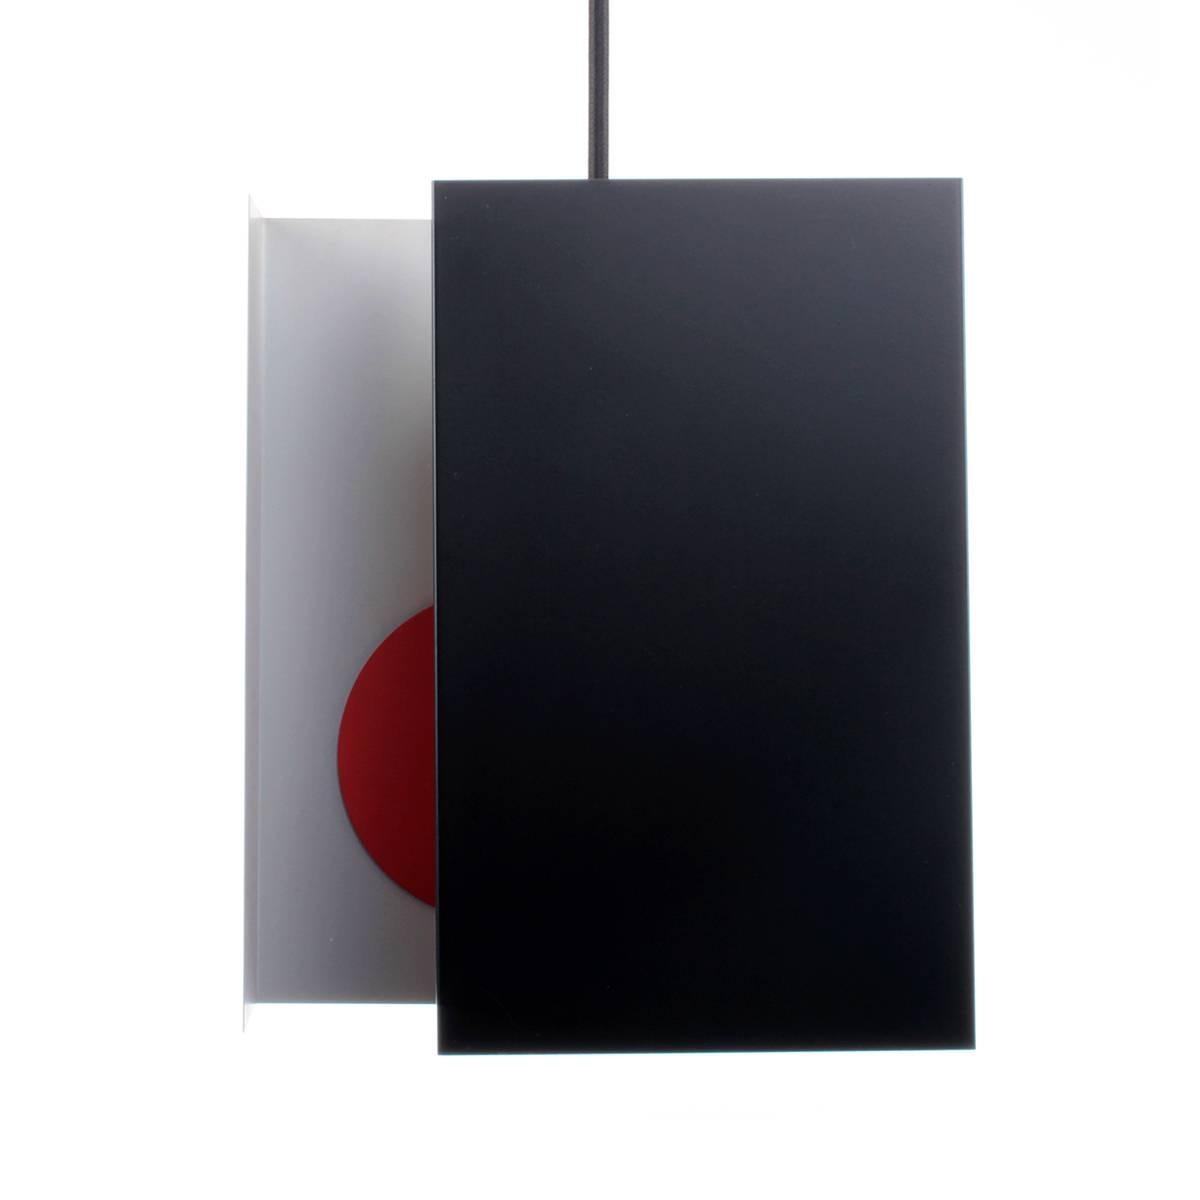 NIPPON, ceiling light or table lamp designed by Simon P. Henningsen for LYFA in 1970 - Scandinavian Modern red and black pendant or table light in very good vintage condition.

EXTREMELY RARE Danish mid century design piece - a top-tier and